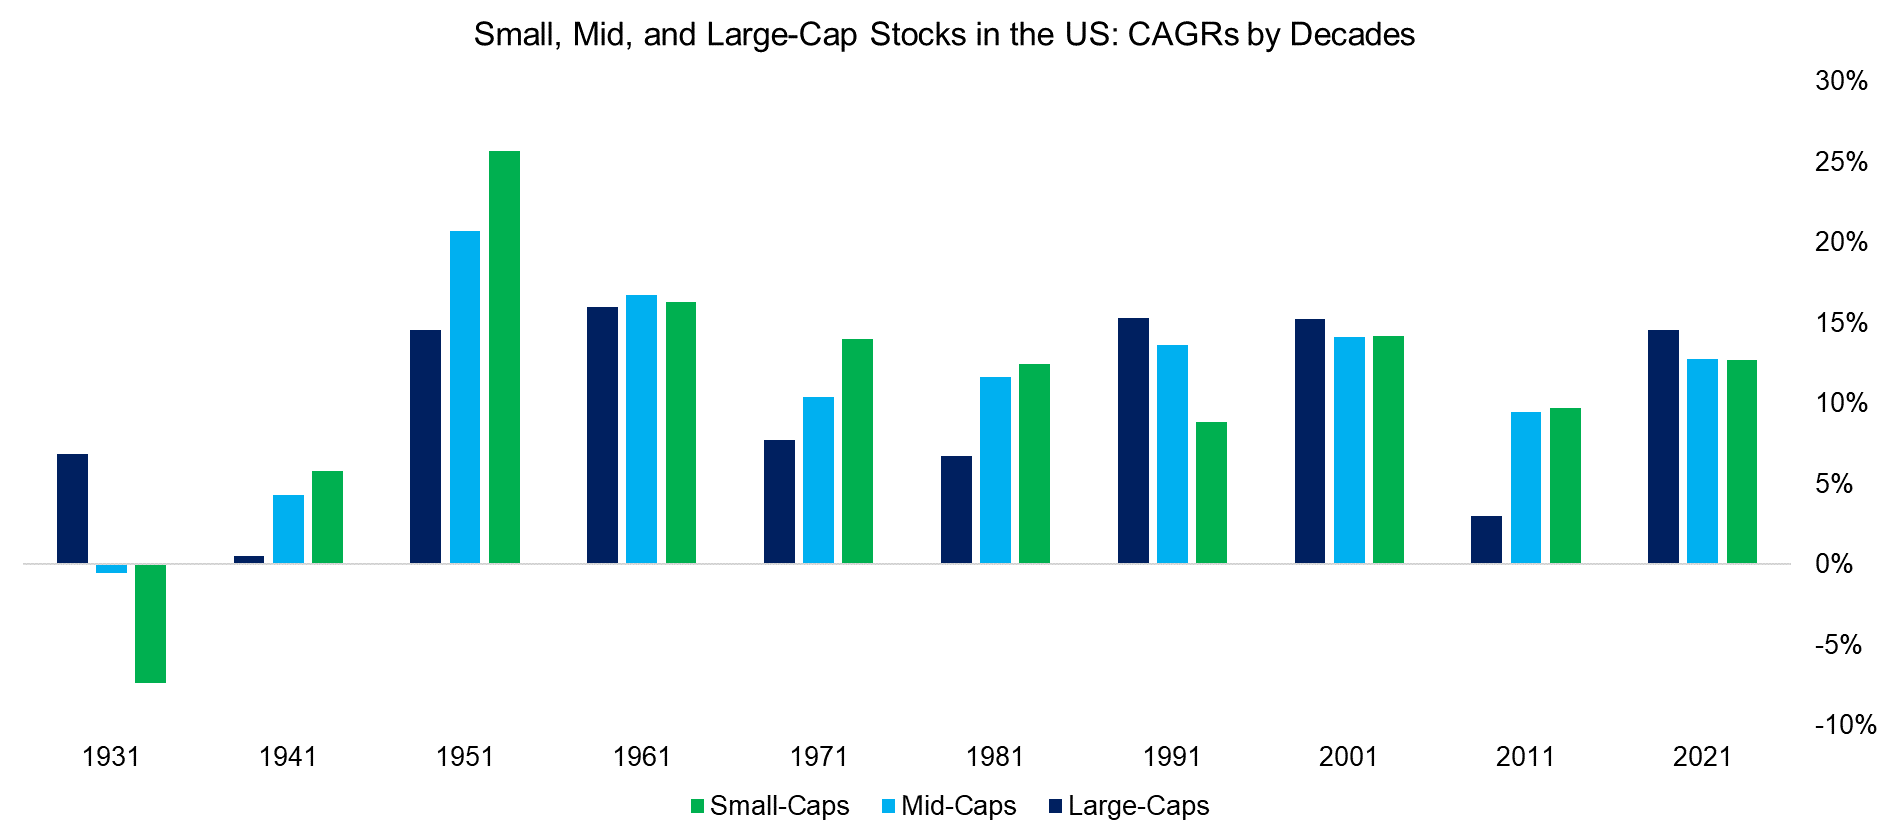 Small, Mid, and Large-Cap Stocks in the US CAGRs by Decades